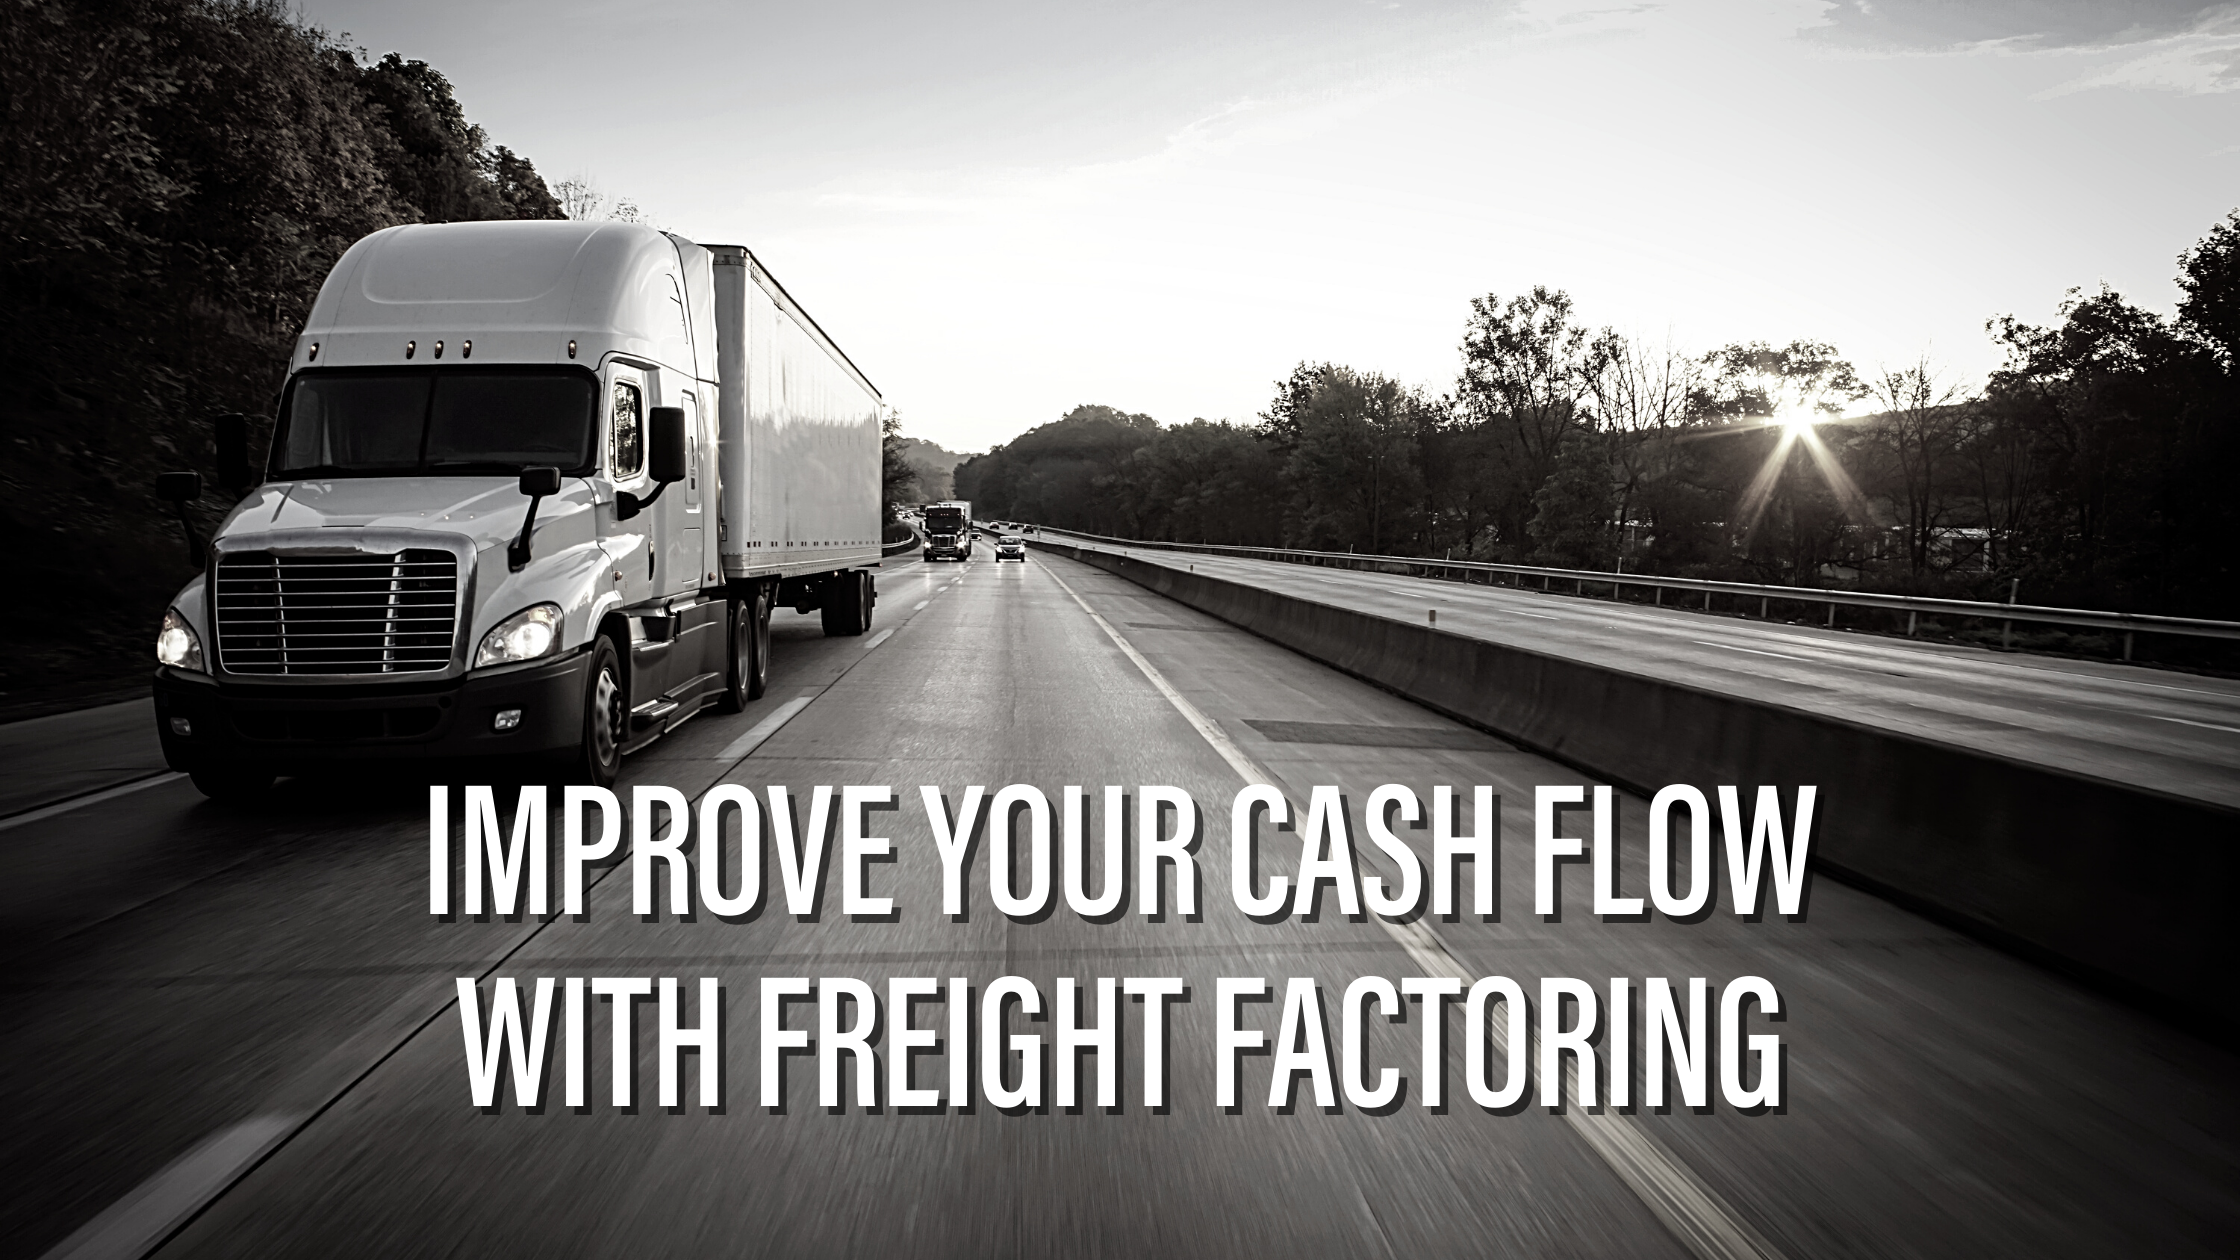 Improve Your Cash Flow with Freight Factoring